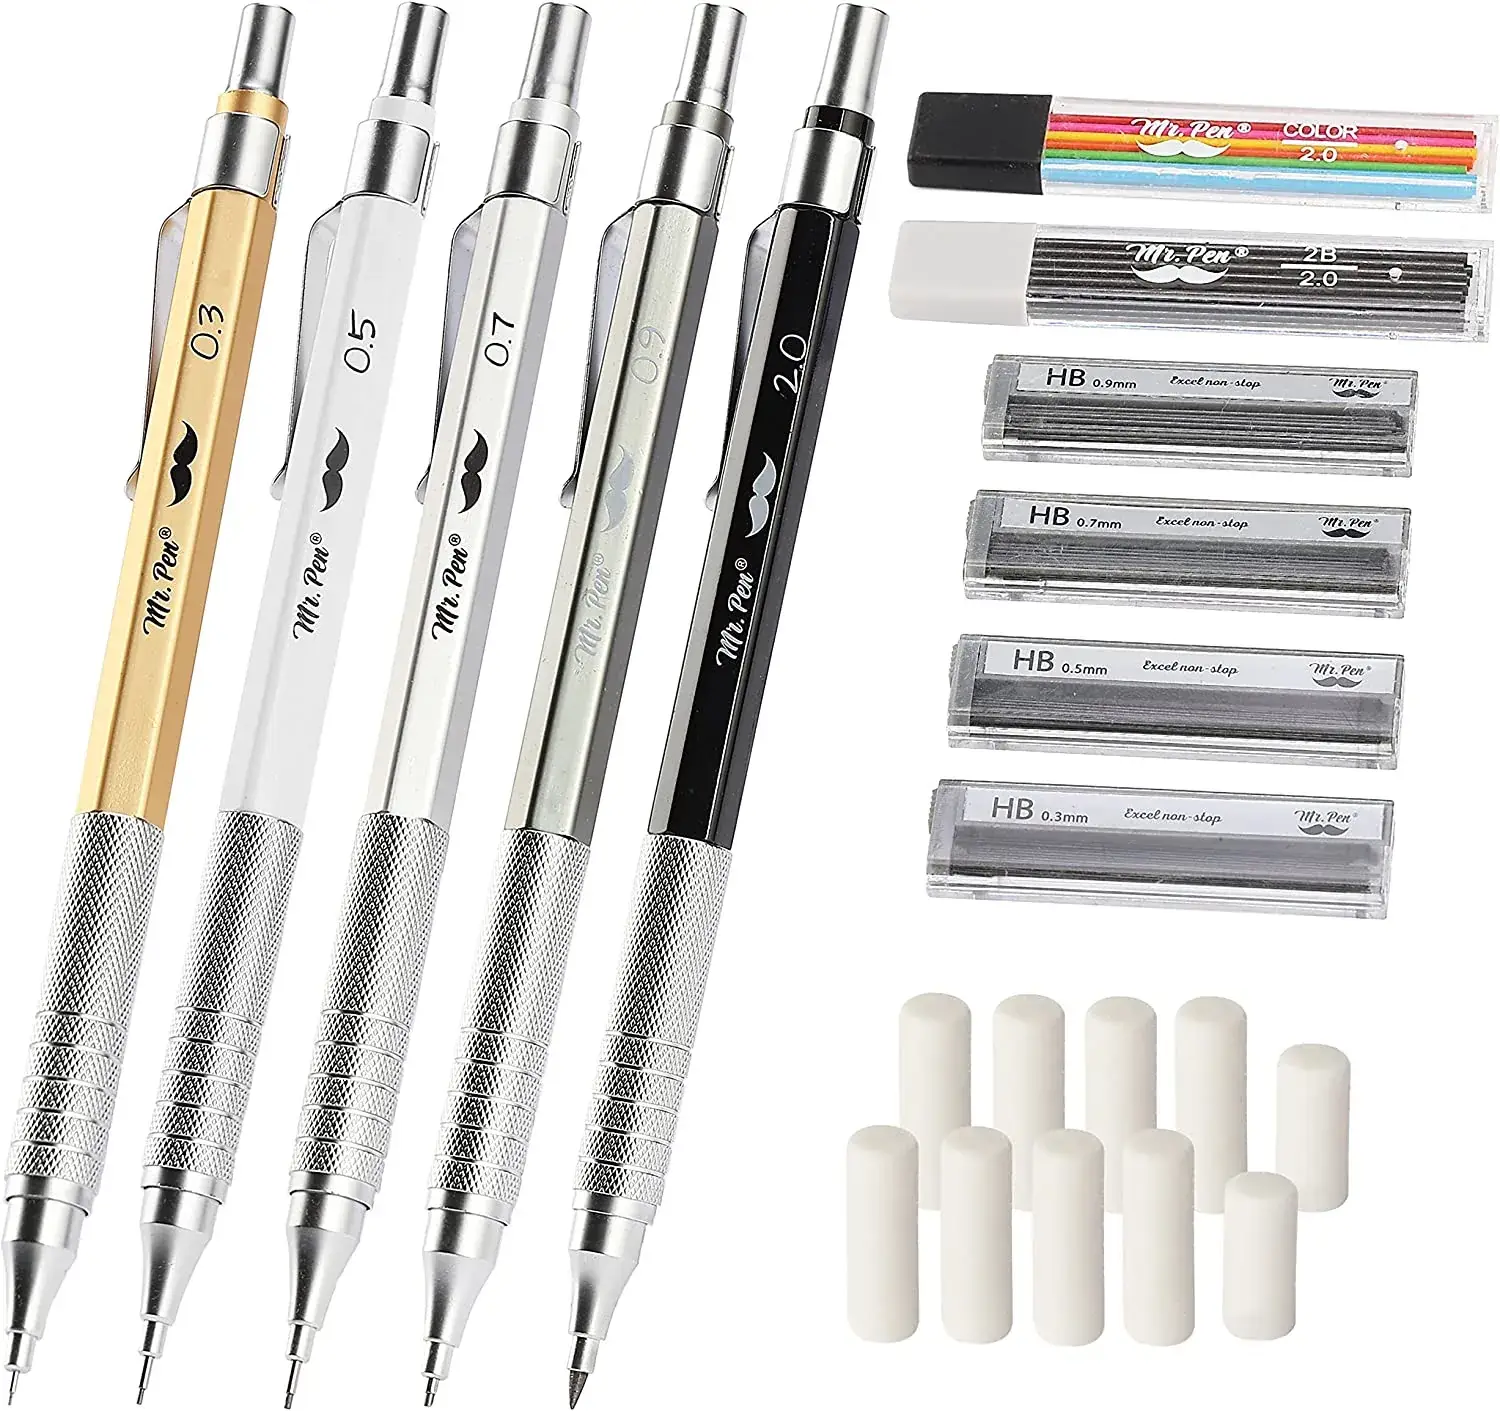  Mr. Pen- Mechanical Pencil Set with Leads and Eraser